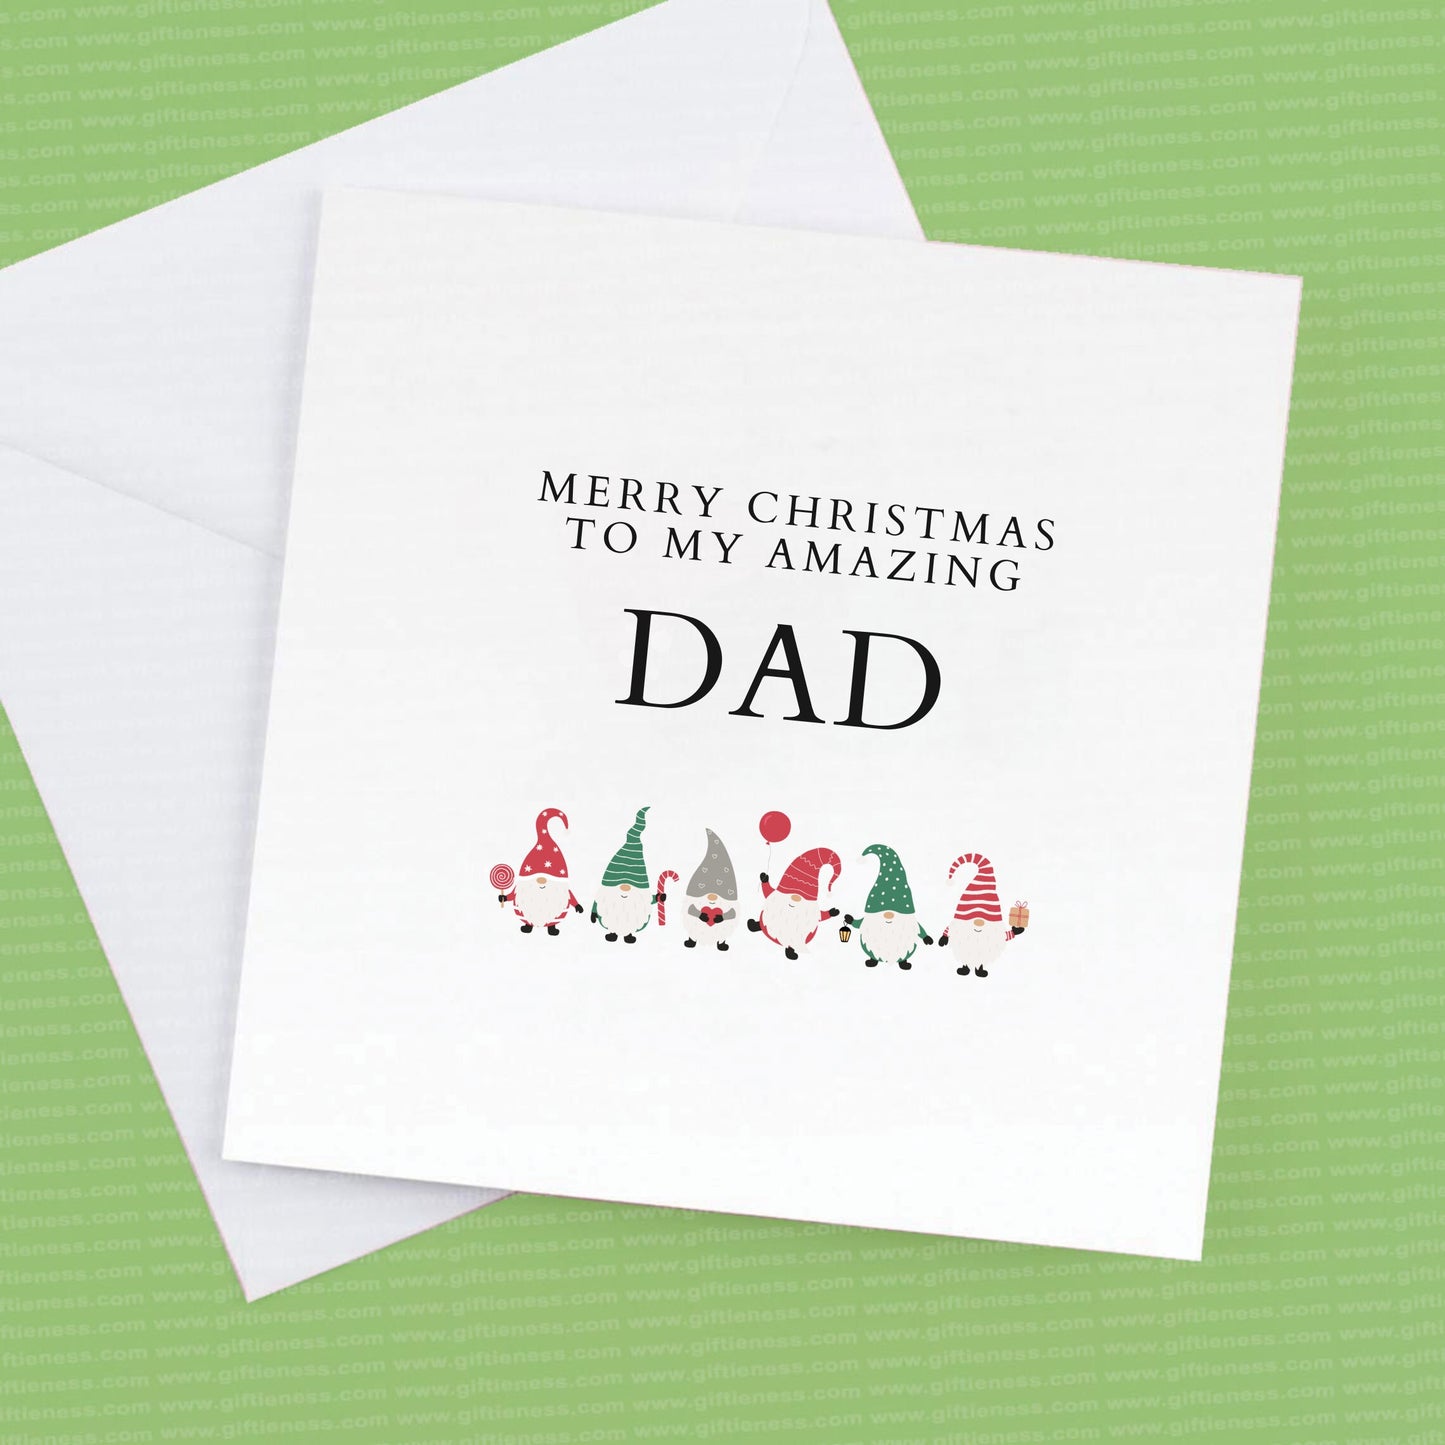 Merry Christmas to my amazing Dad, Christmas card for your Dad